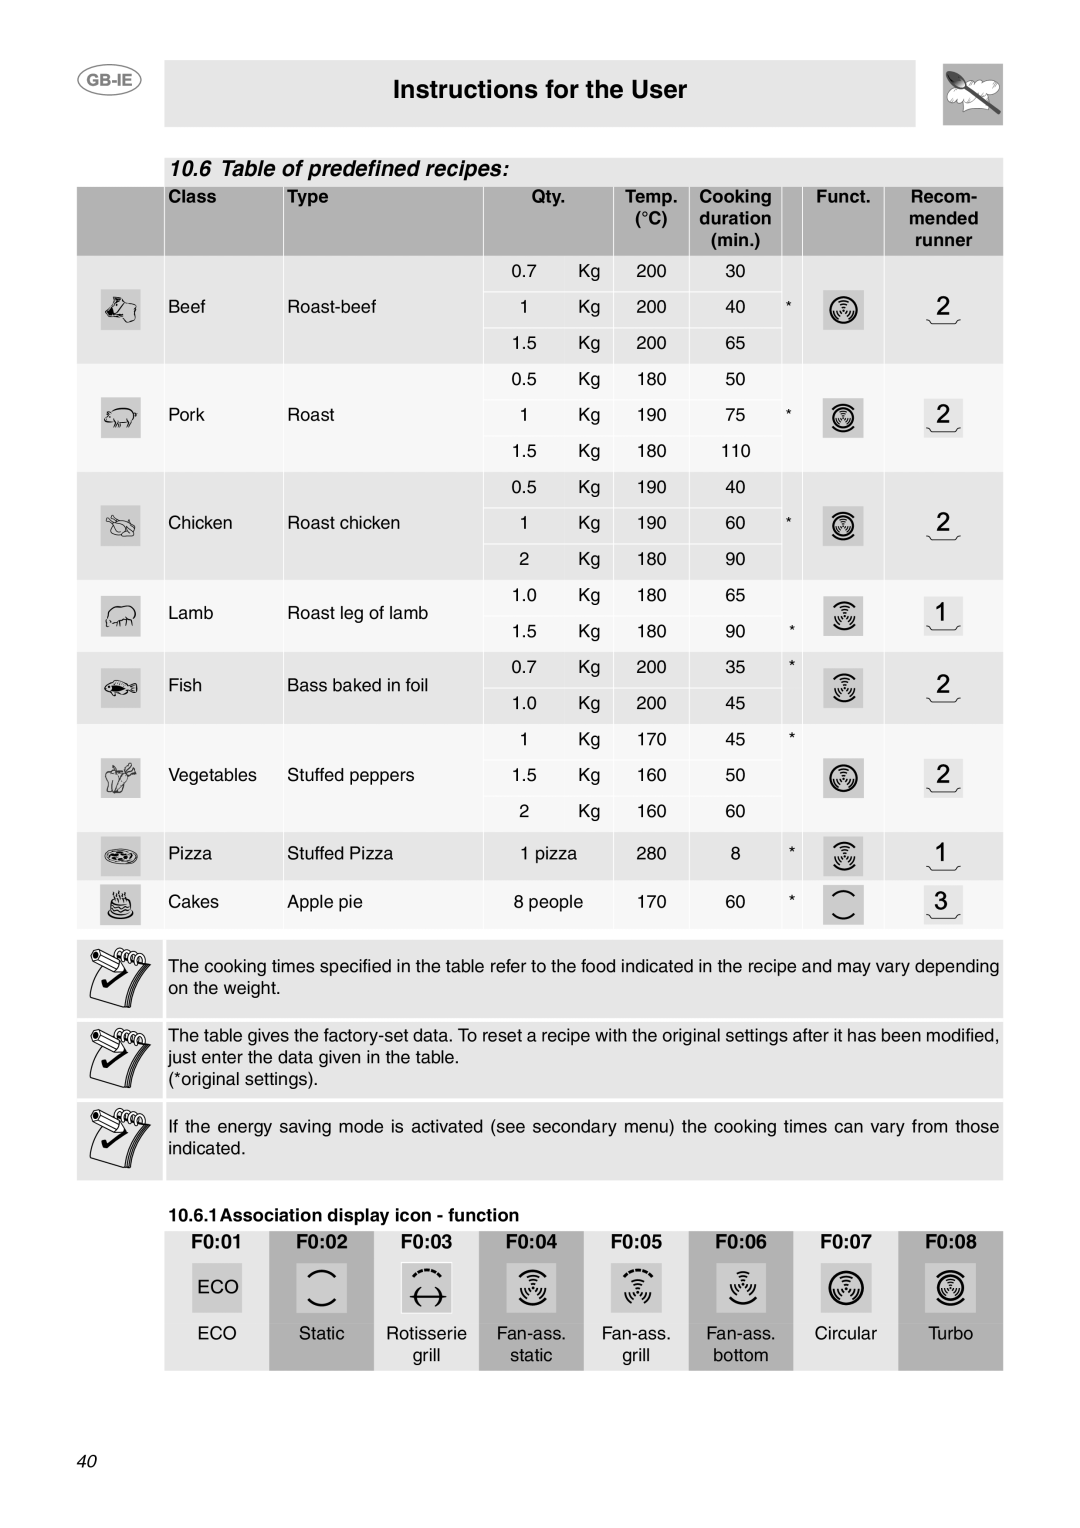 Smeg CE9CMX Table of predefined recipes, Instructions for the User, F001, F002, F003, F004, F005, F006, F007, F008, Class 